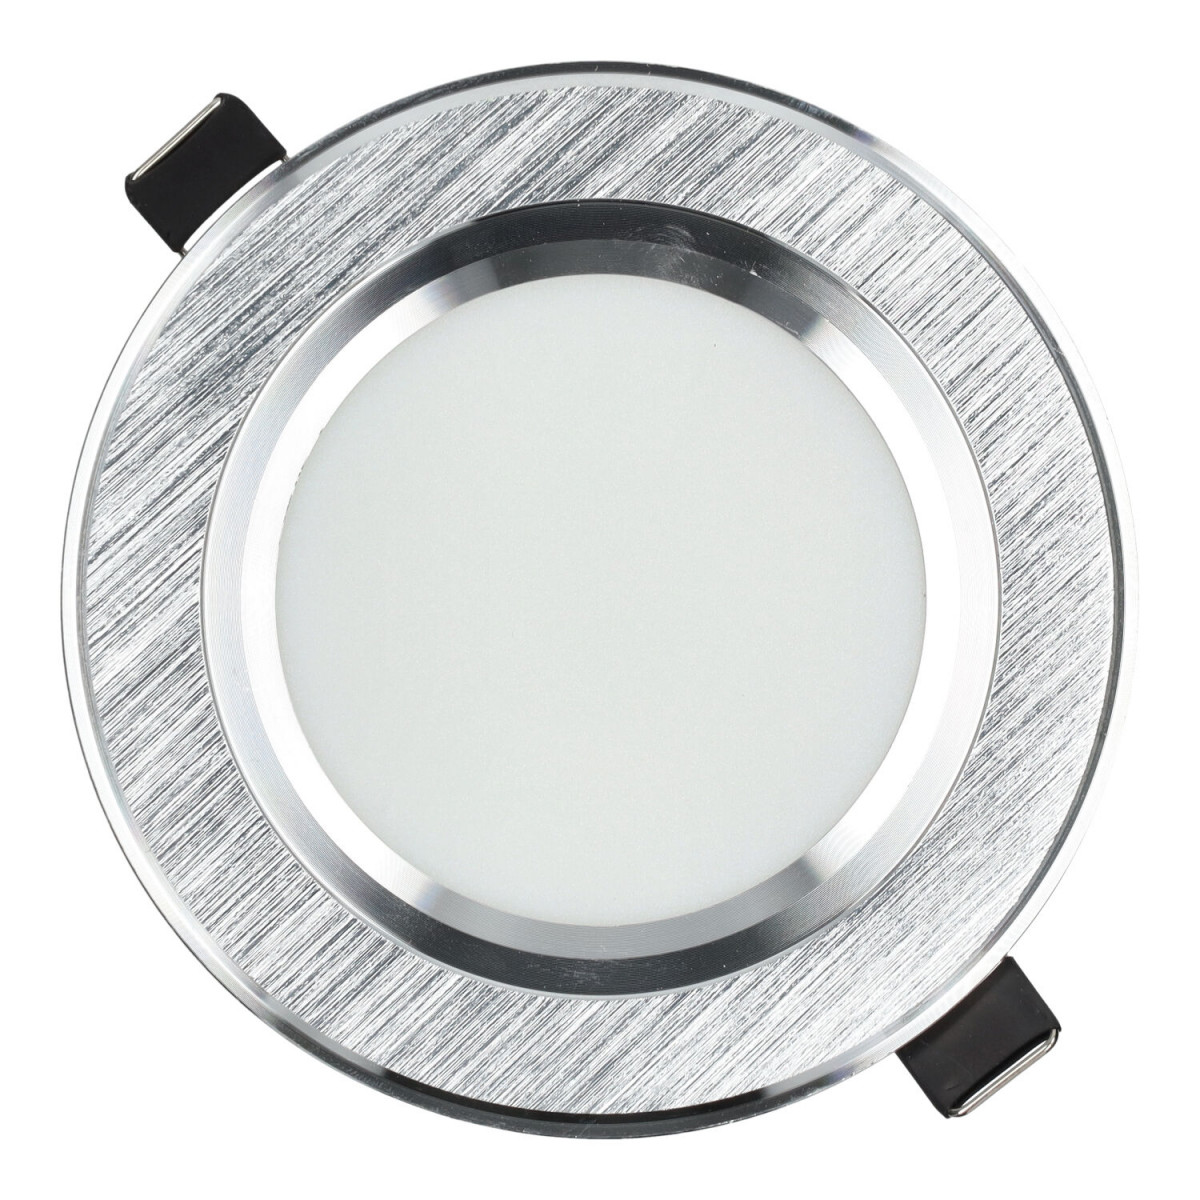 LED Downlight - Wide Beam Angle, 7W